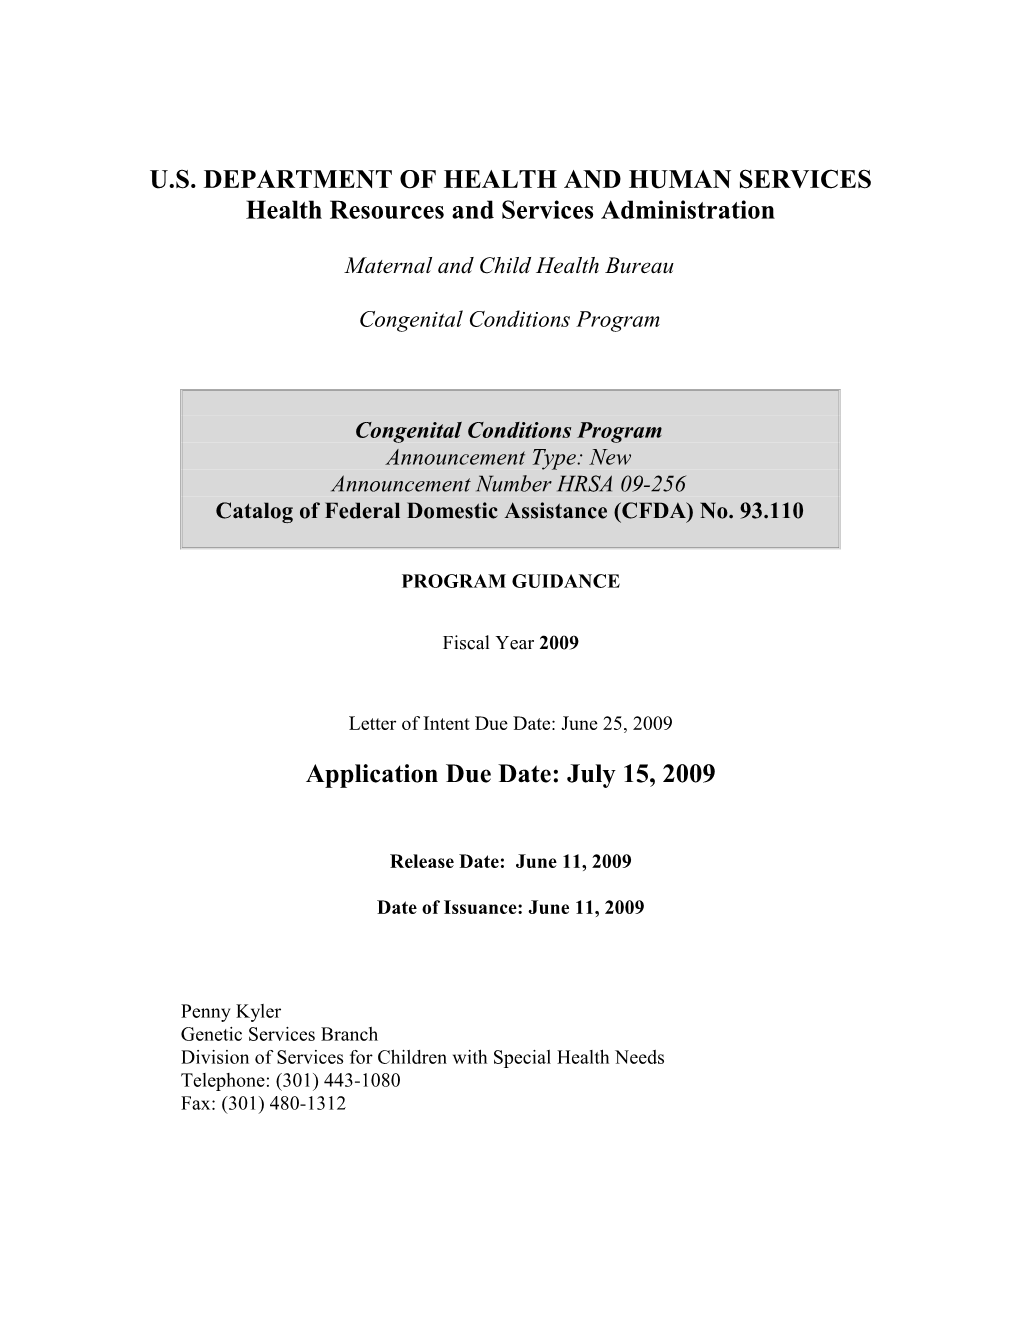 U.S. Department of Health and Human Services s5